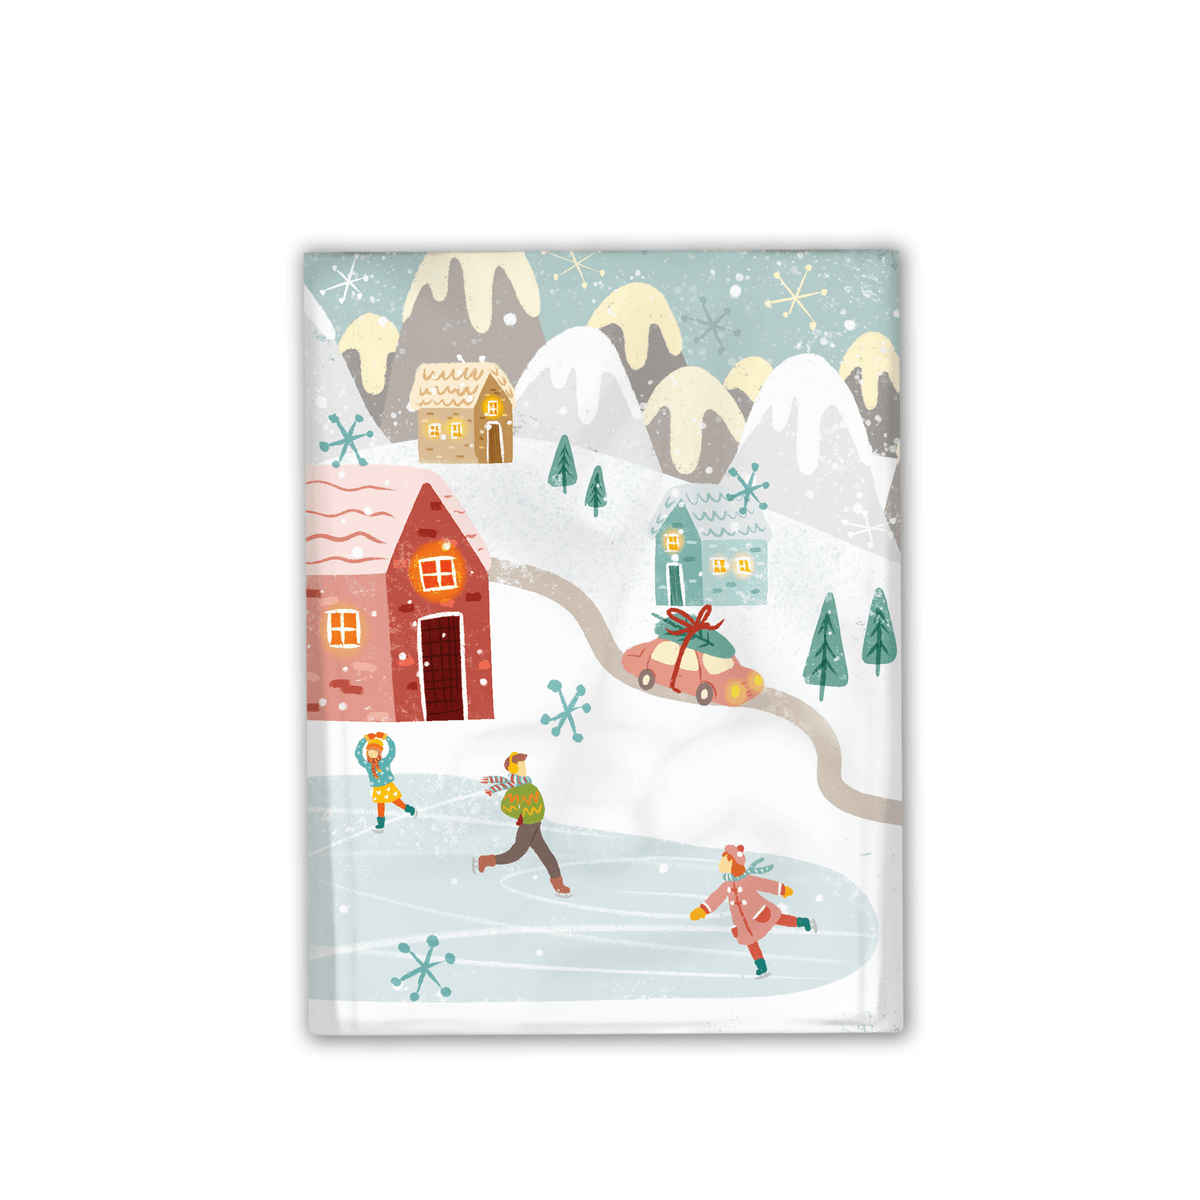 10x13 Winter Village Designer Poly Mailers Shipping Envelopes Premium Printed Bags - Pro Supply Global